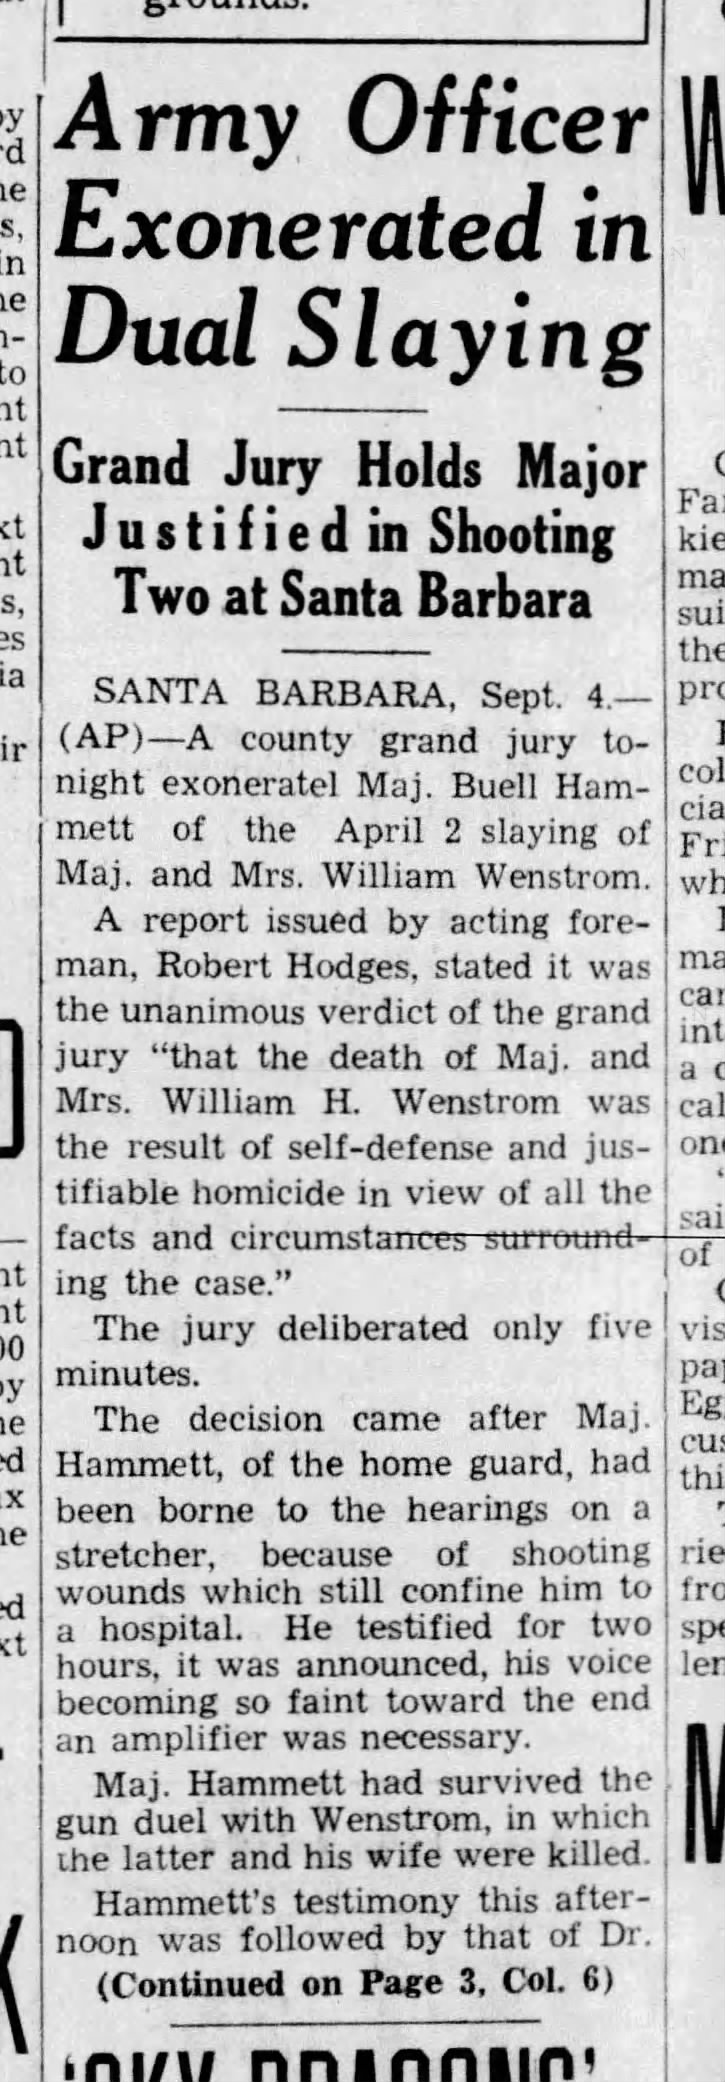 Amry officer exonerated The PRess Democrat Santa Rosa 05 Sep 1942 (page one)